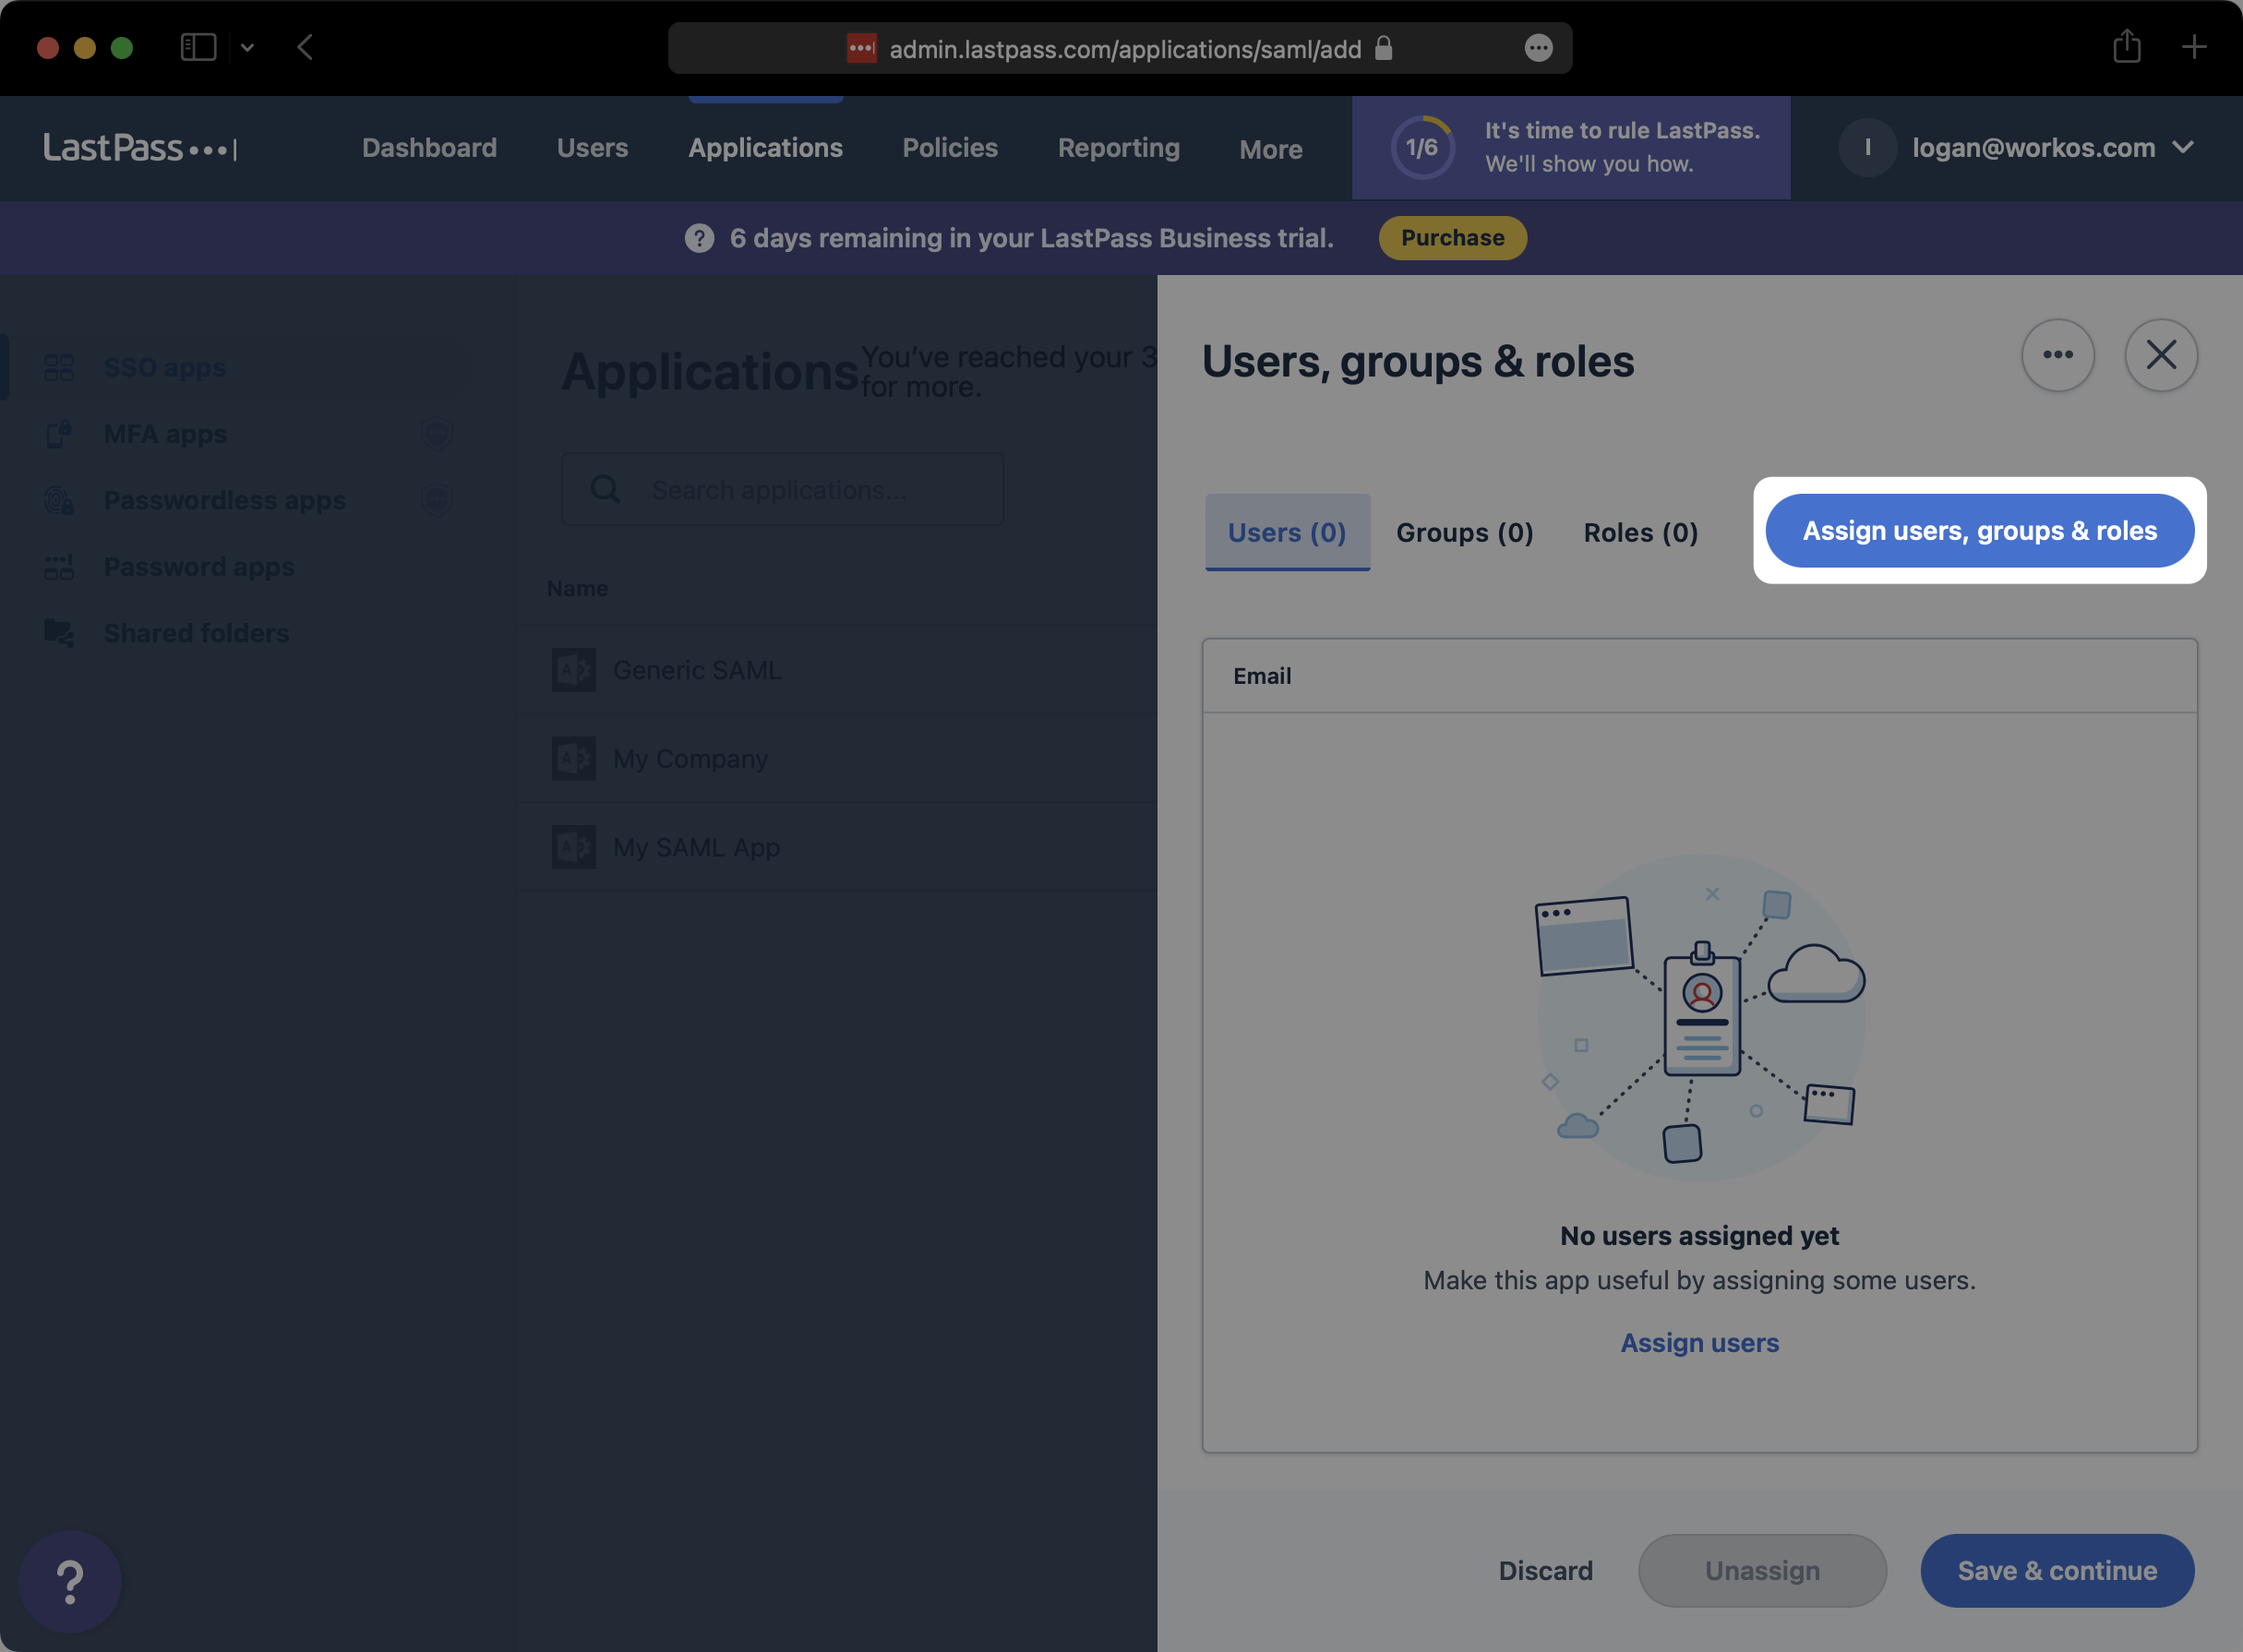 A screenshot showing to select "Assign users, groups & roles" for your LastPass SAML app.